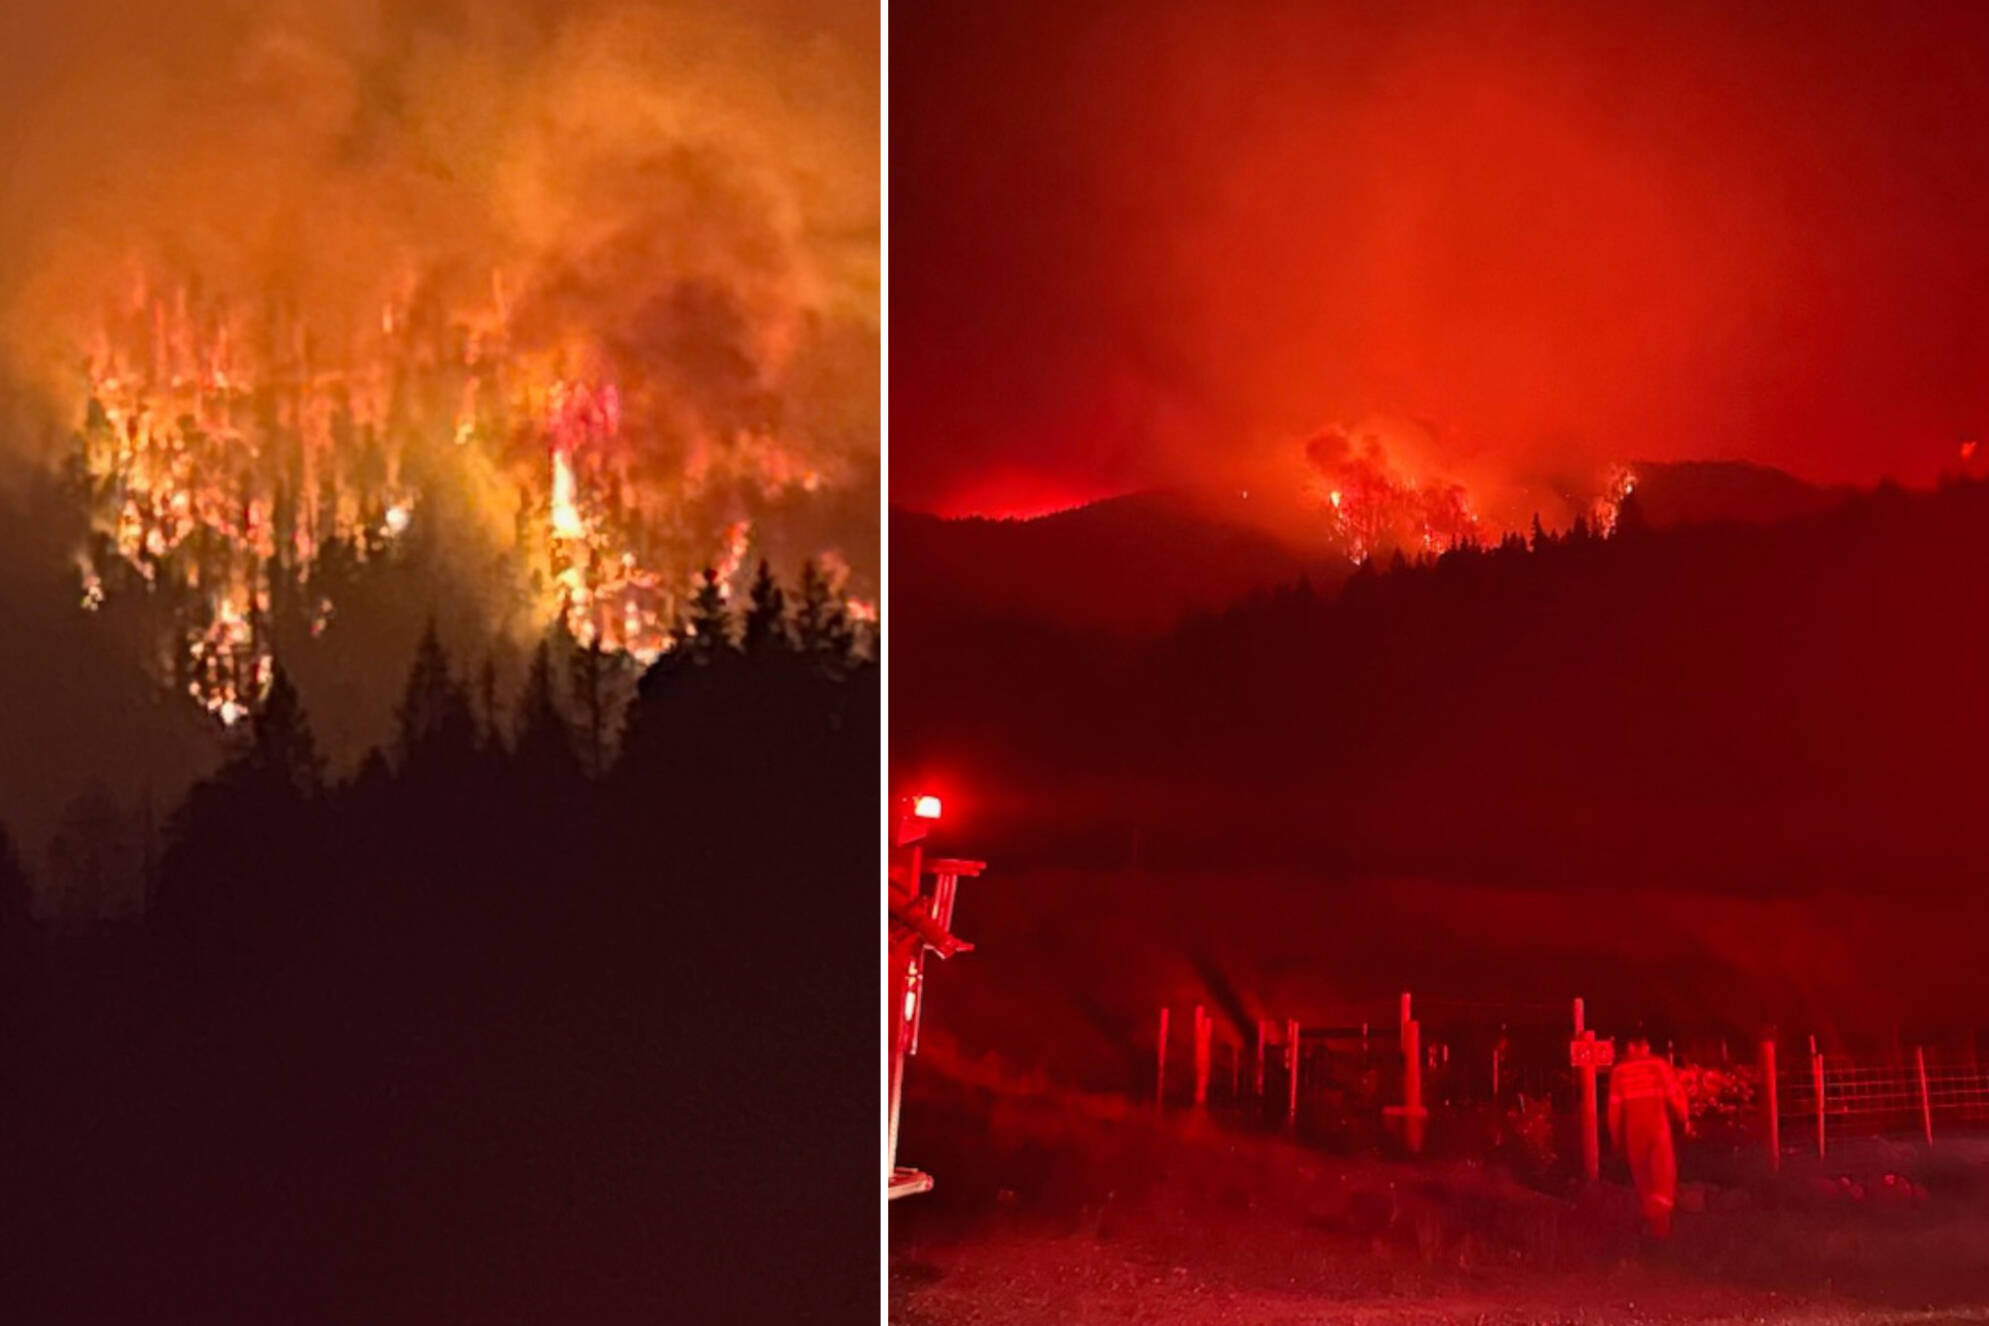 Derek Sutherland, director of the Shuswap Emergency Program’s (SEP) Emergency Operations Centre remarked Friday night, Aug. 18, that “it’s been absolutely the most devastating day of wildfire in the Shuswap’s history.” (CSRD images)